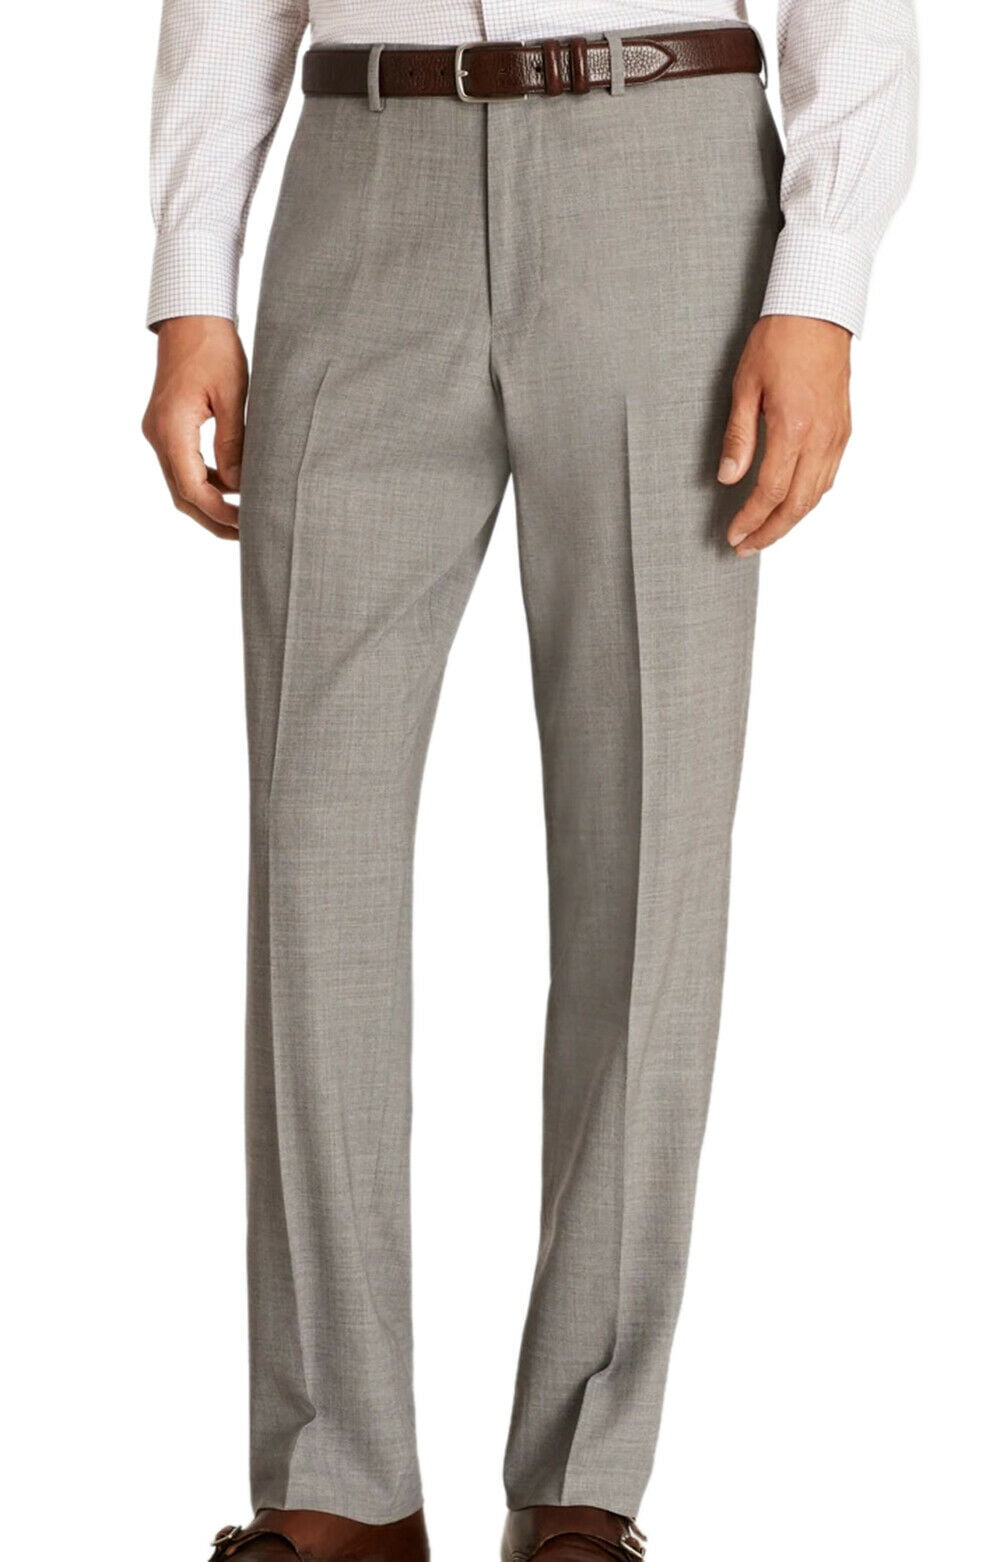 Buy Beige Trousers  Pants for Men by BROOKS BROTHERS Online  Ajiocom